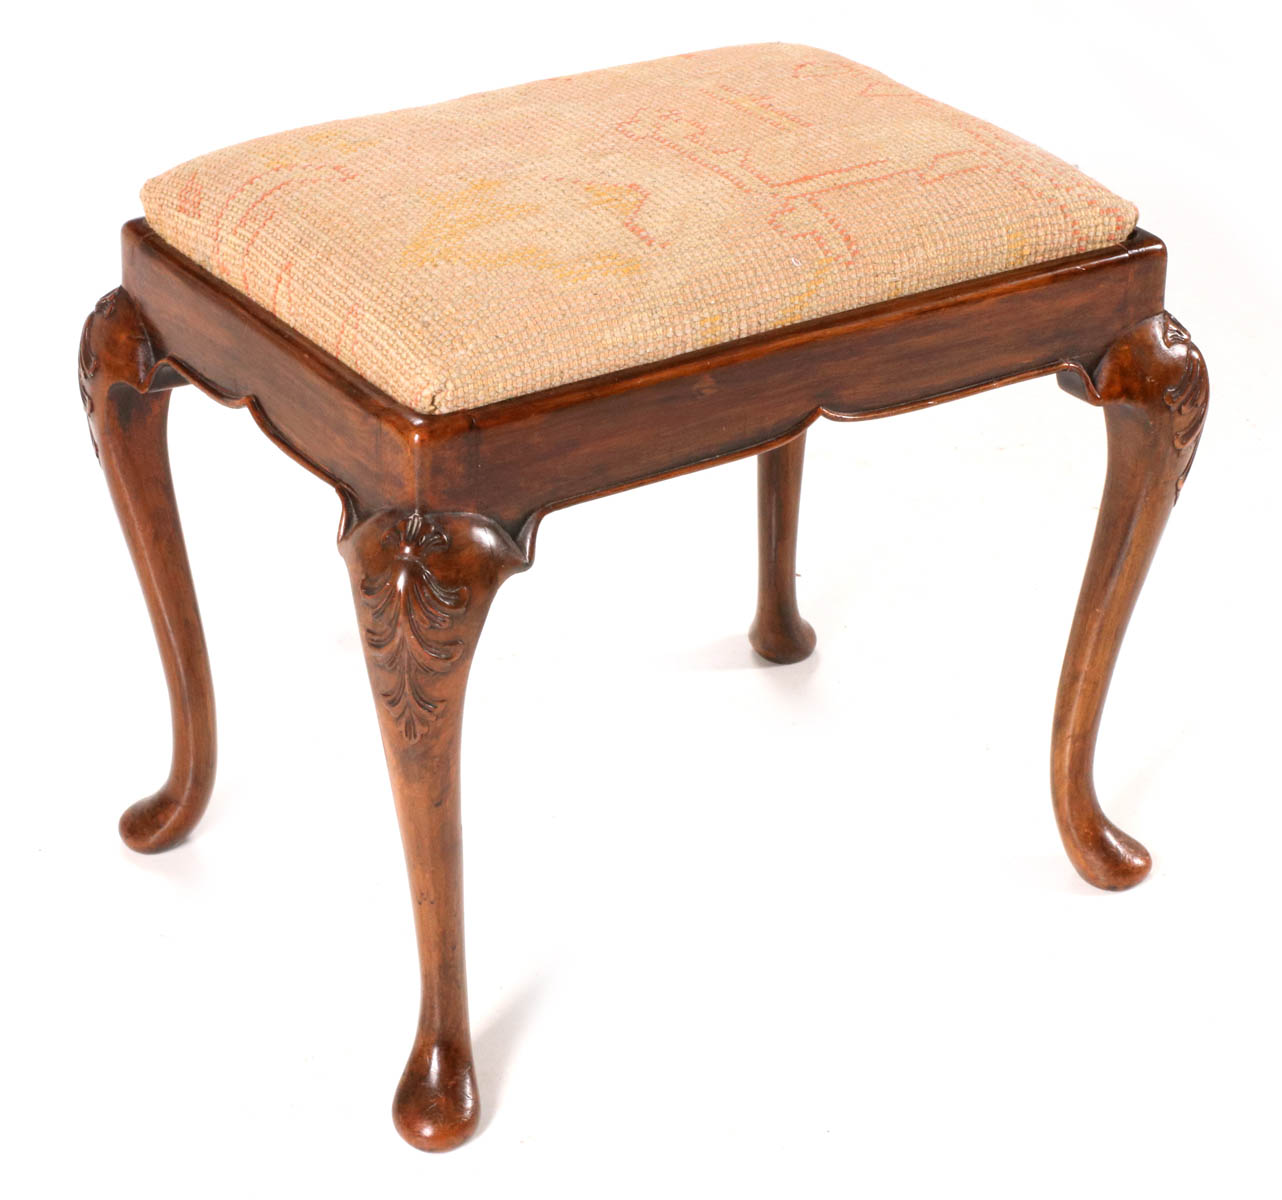 A GEORGIAN PAD FOOT STOOL WITH OUSHAK COVERING